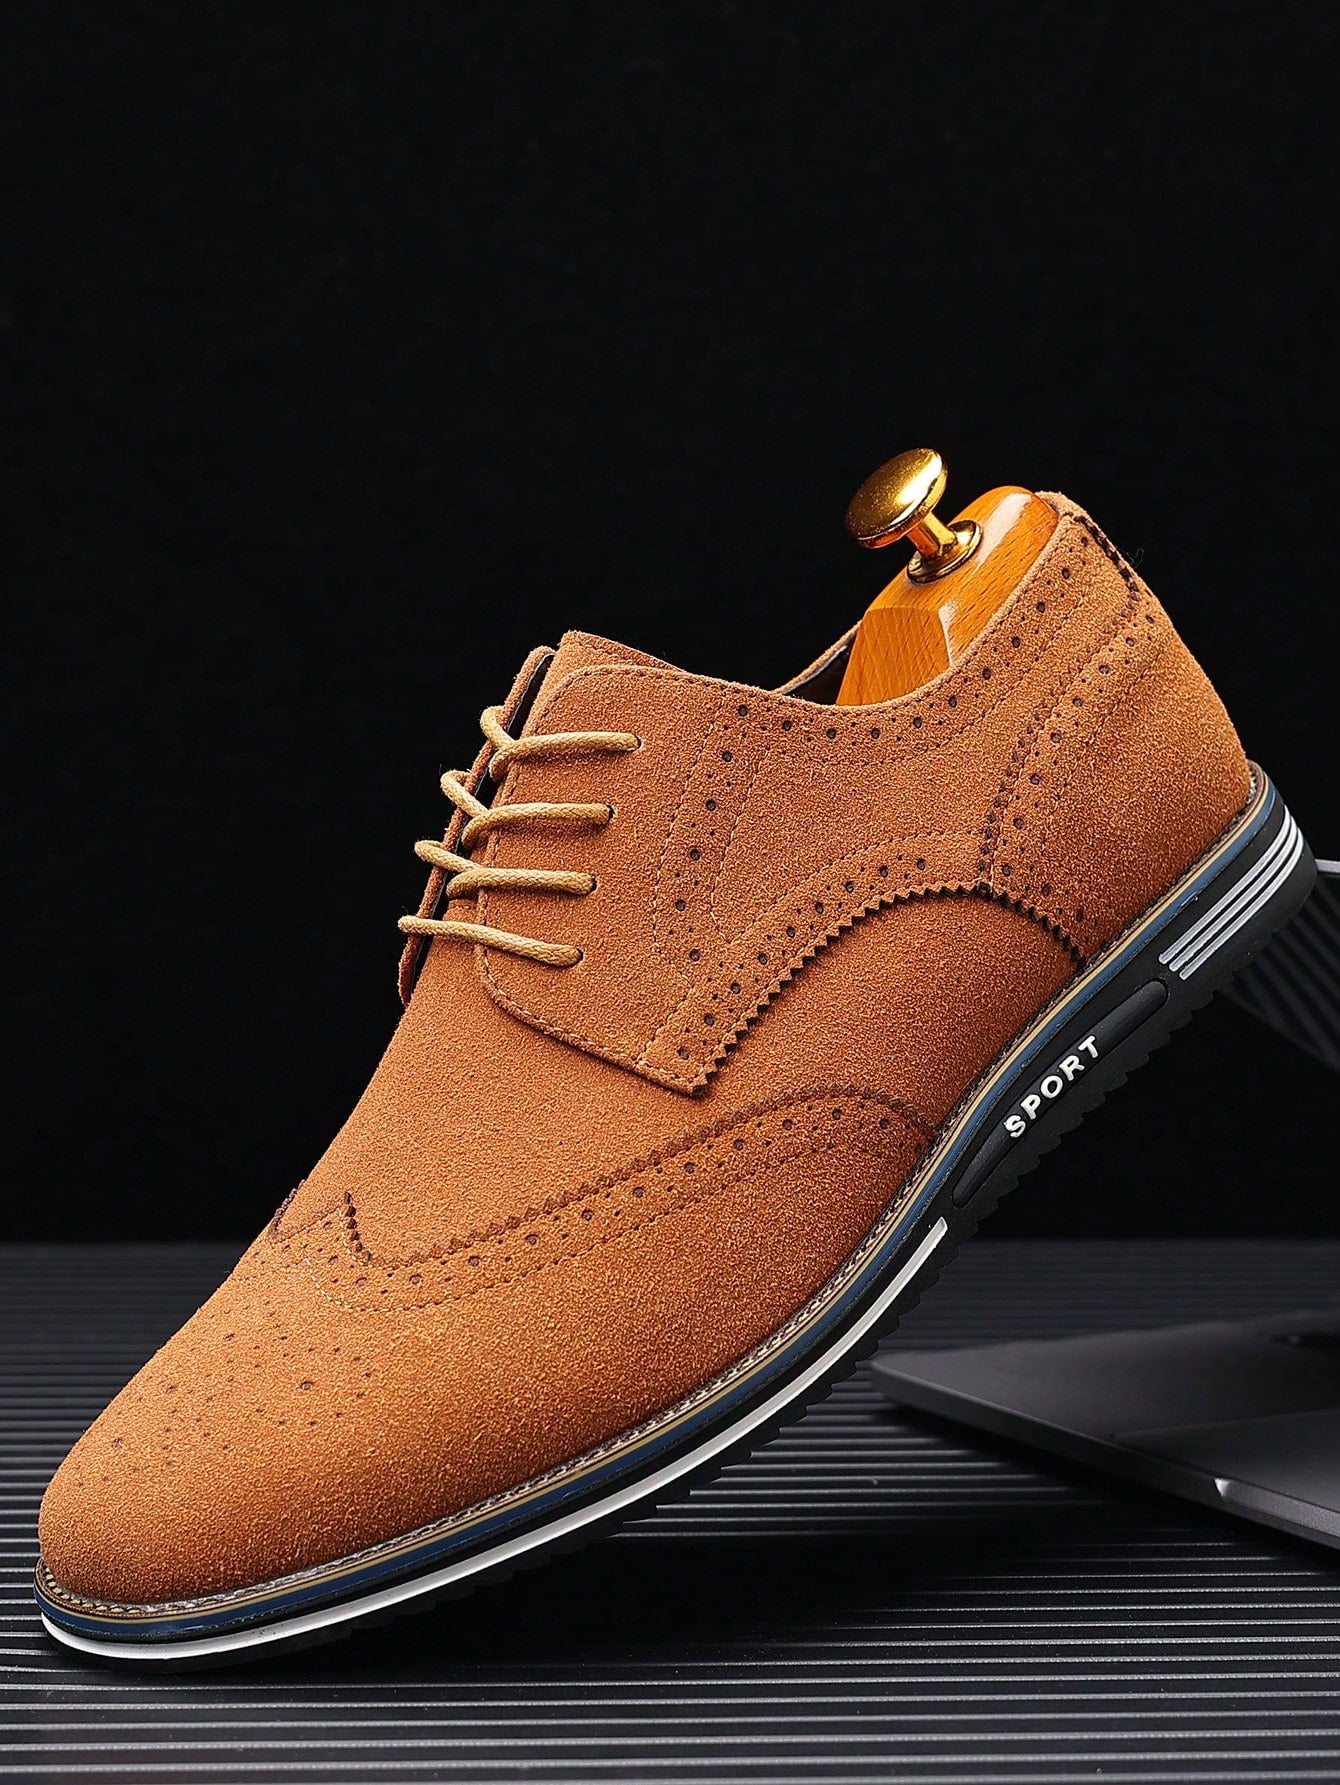 Men Black Lace-up Front Casual shoes, Letter Striped Round Toe Dress Shoes For Daily